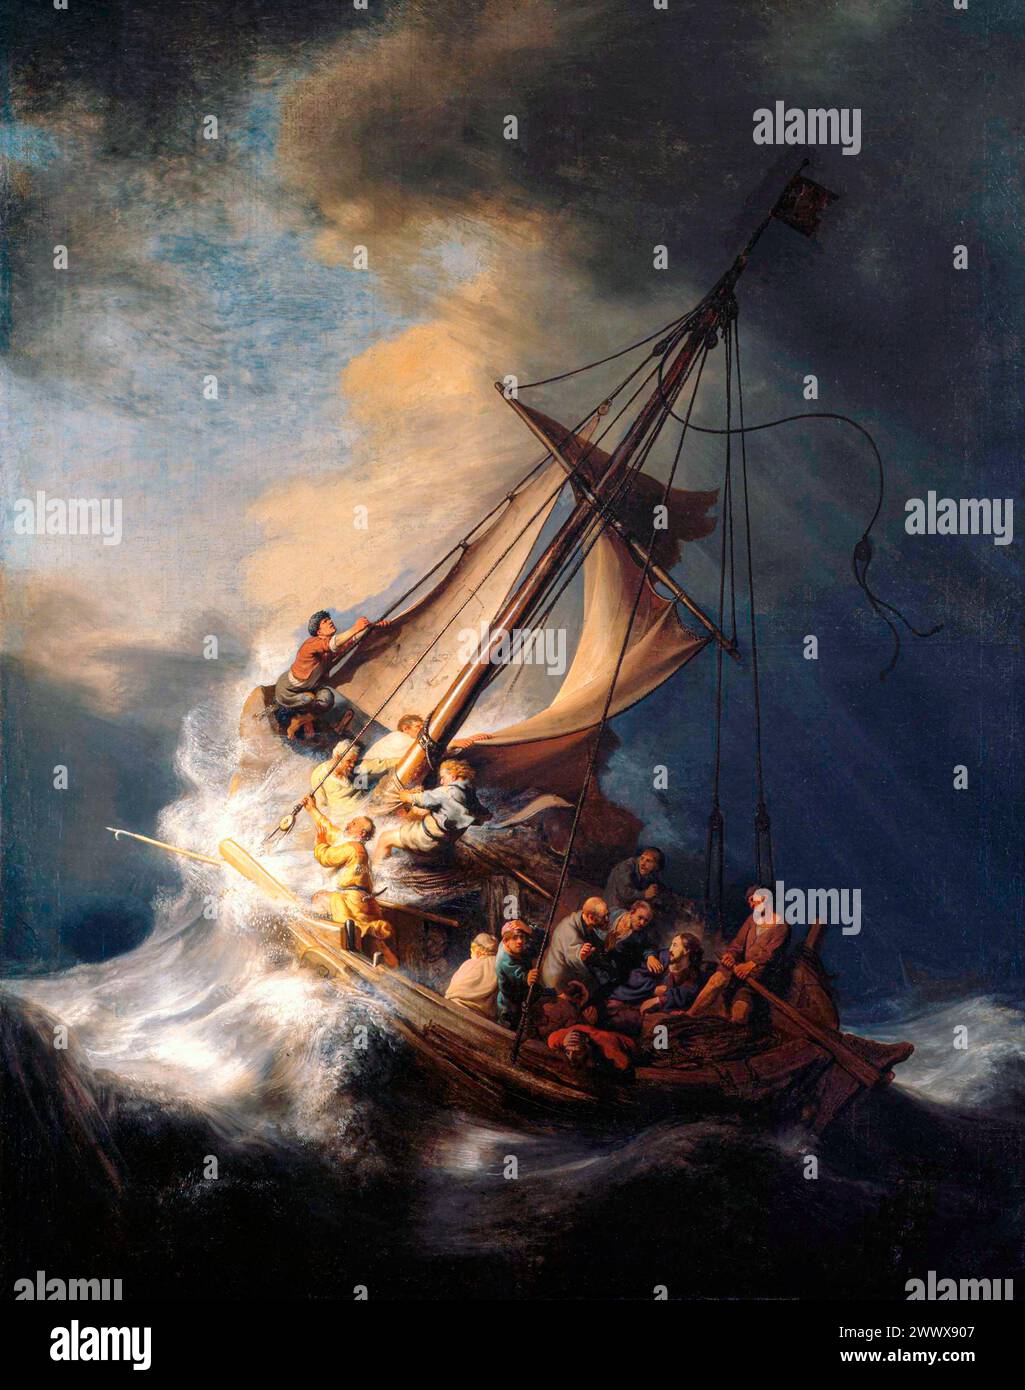 Rembrandt van Rijn's The Storm on the Sea of Galilee (1633) Stock Photo